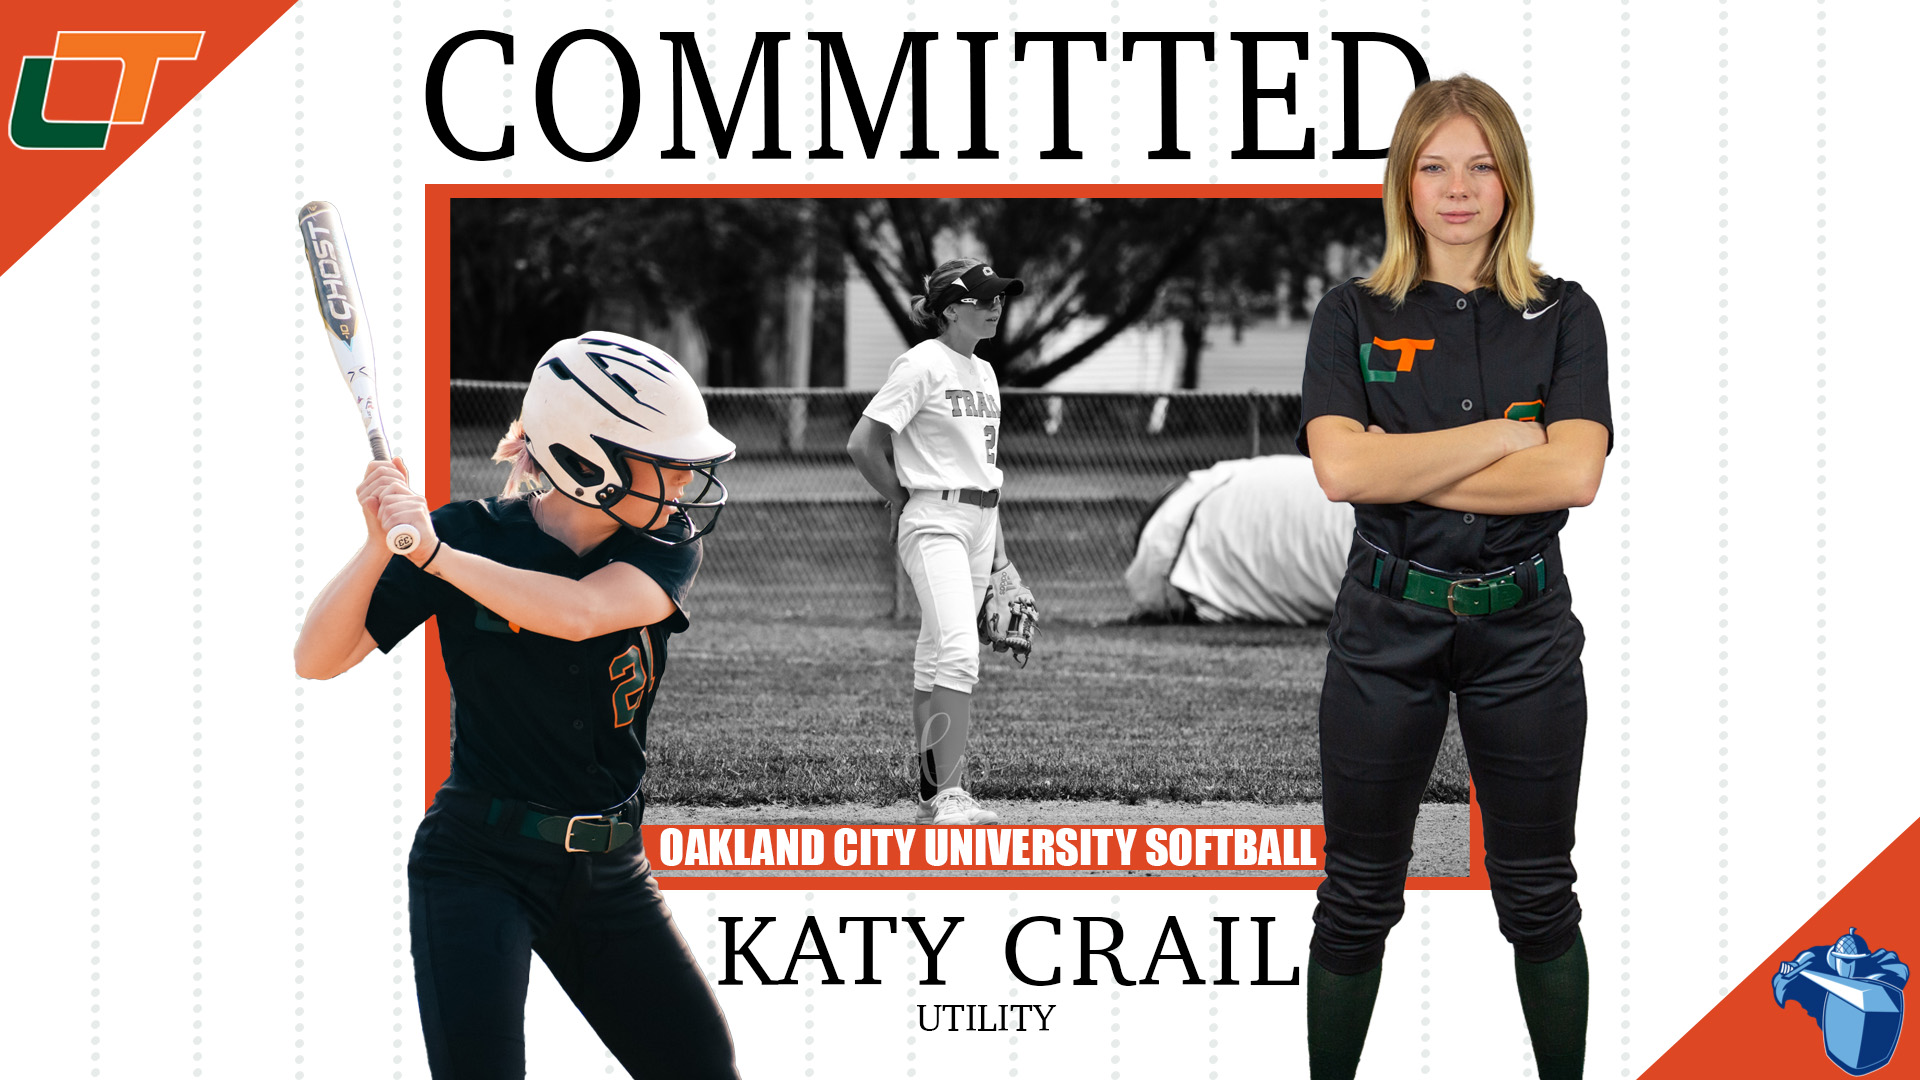 Crail Commits to Oakland City